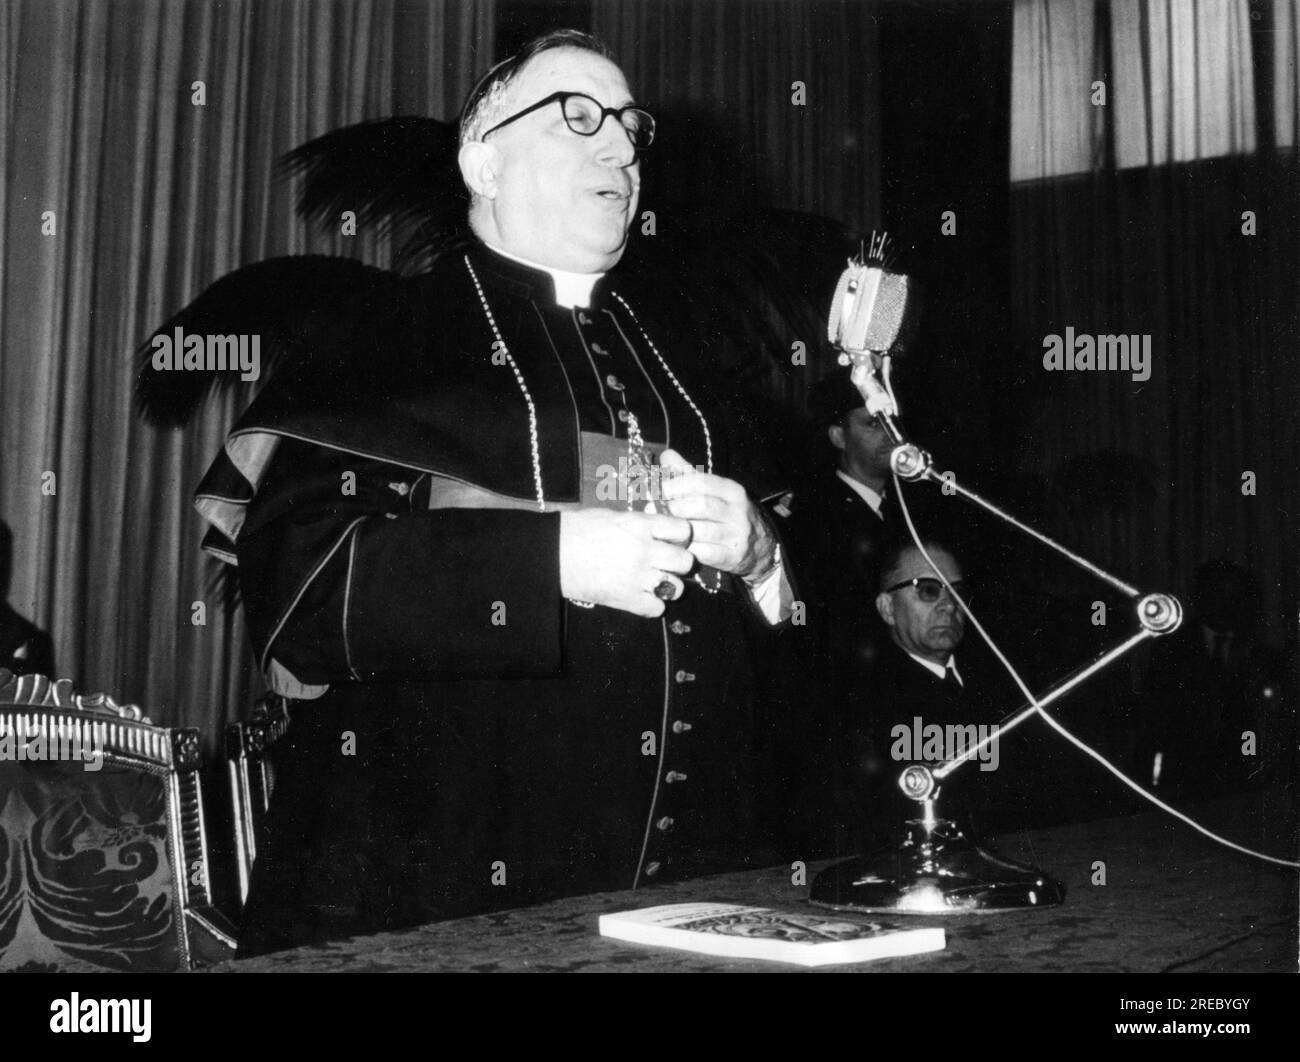 Traglia, Luigi, 3.4.1895 - 22.11.1977, Italian Catholic clergyman, delievering a speech, 1960s, ADDITIONAL-RIGHTS-CLEARANCE-INFO-NOT-AVAILABLE Stock Photo